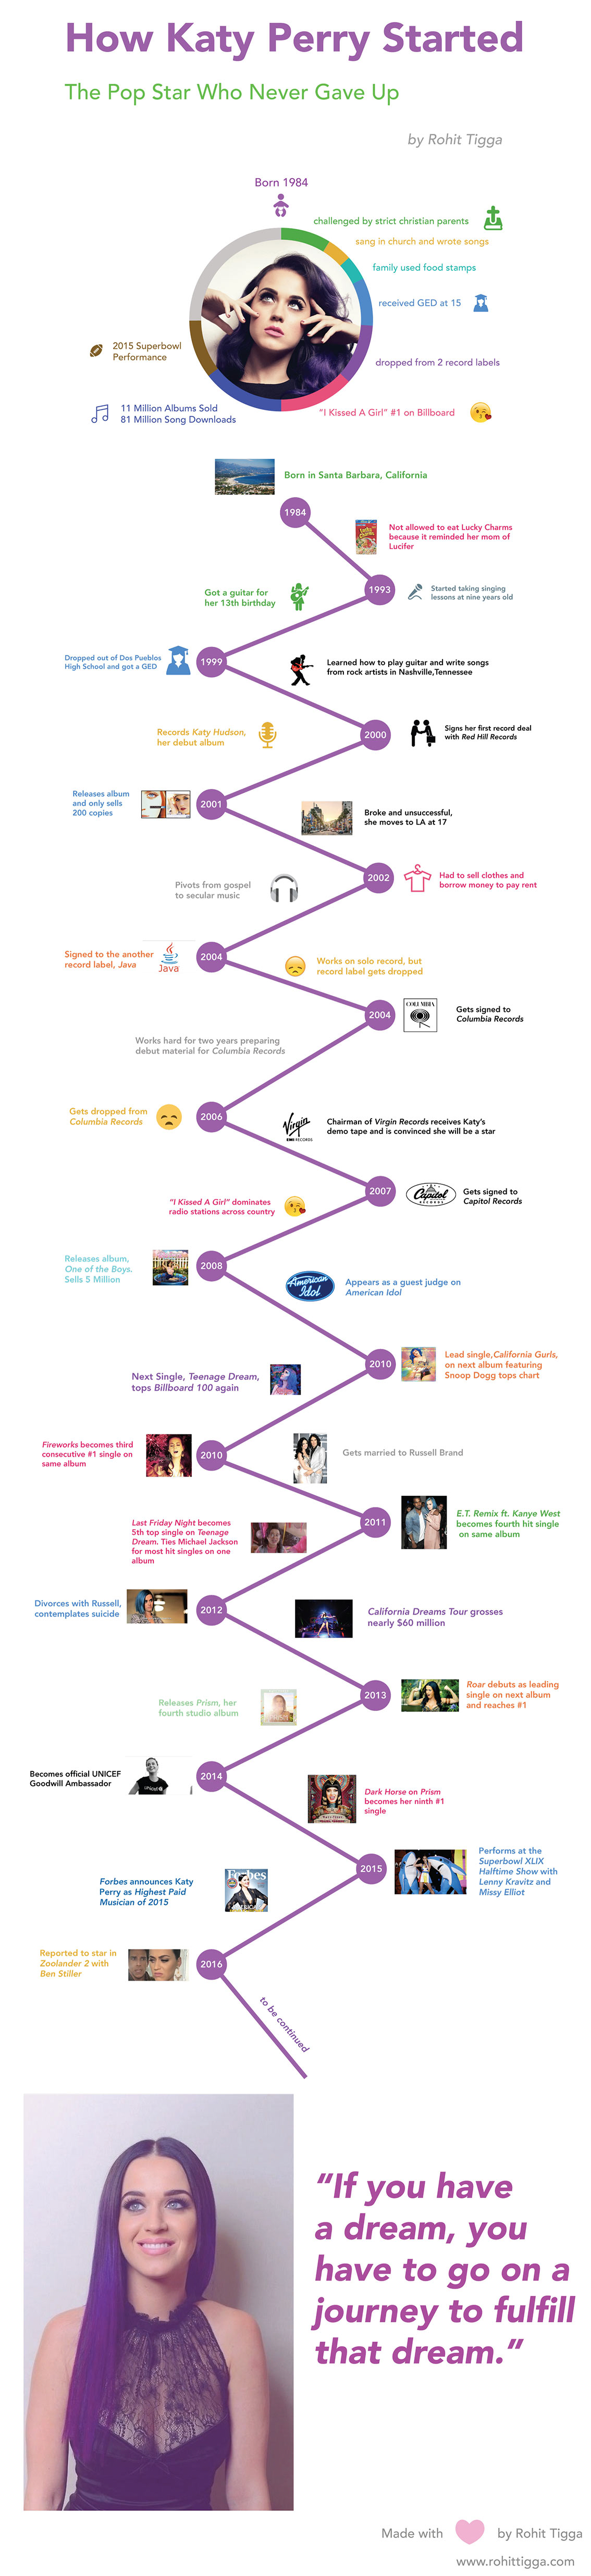 How Katy Perry Became Famous Infographic